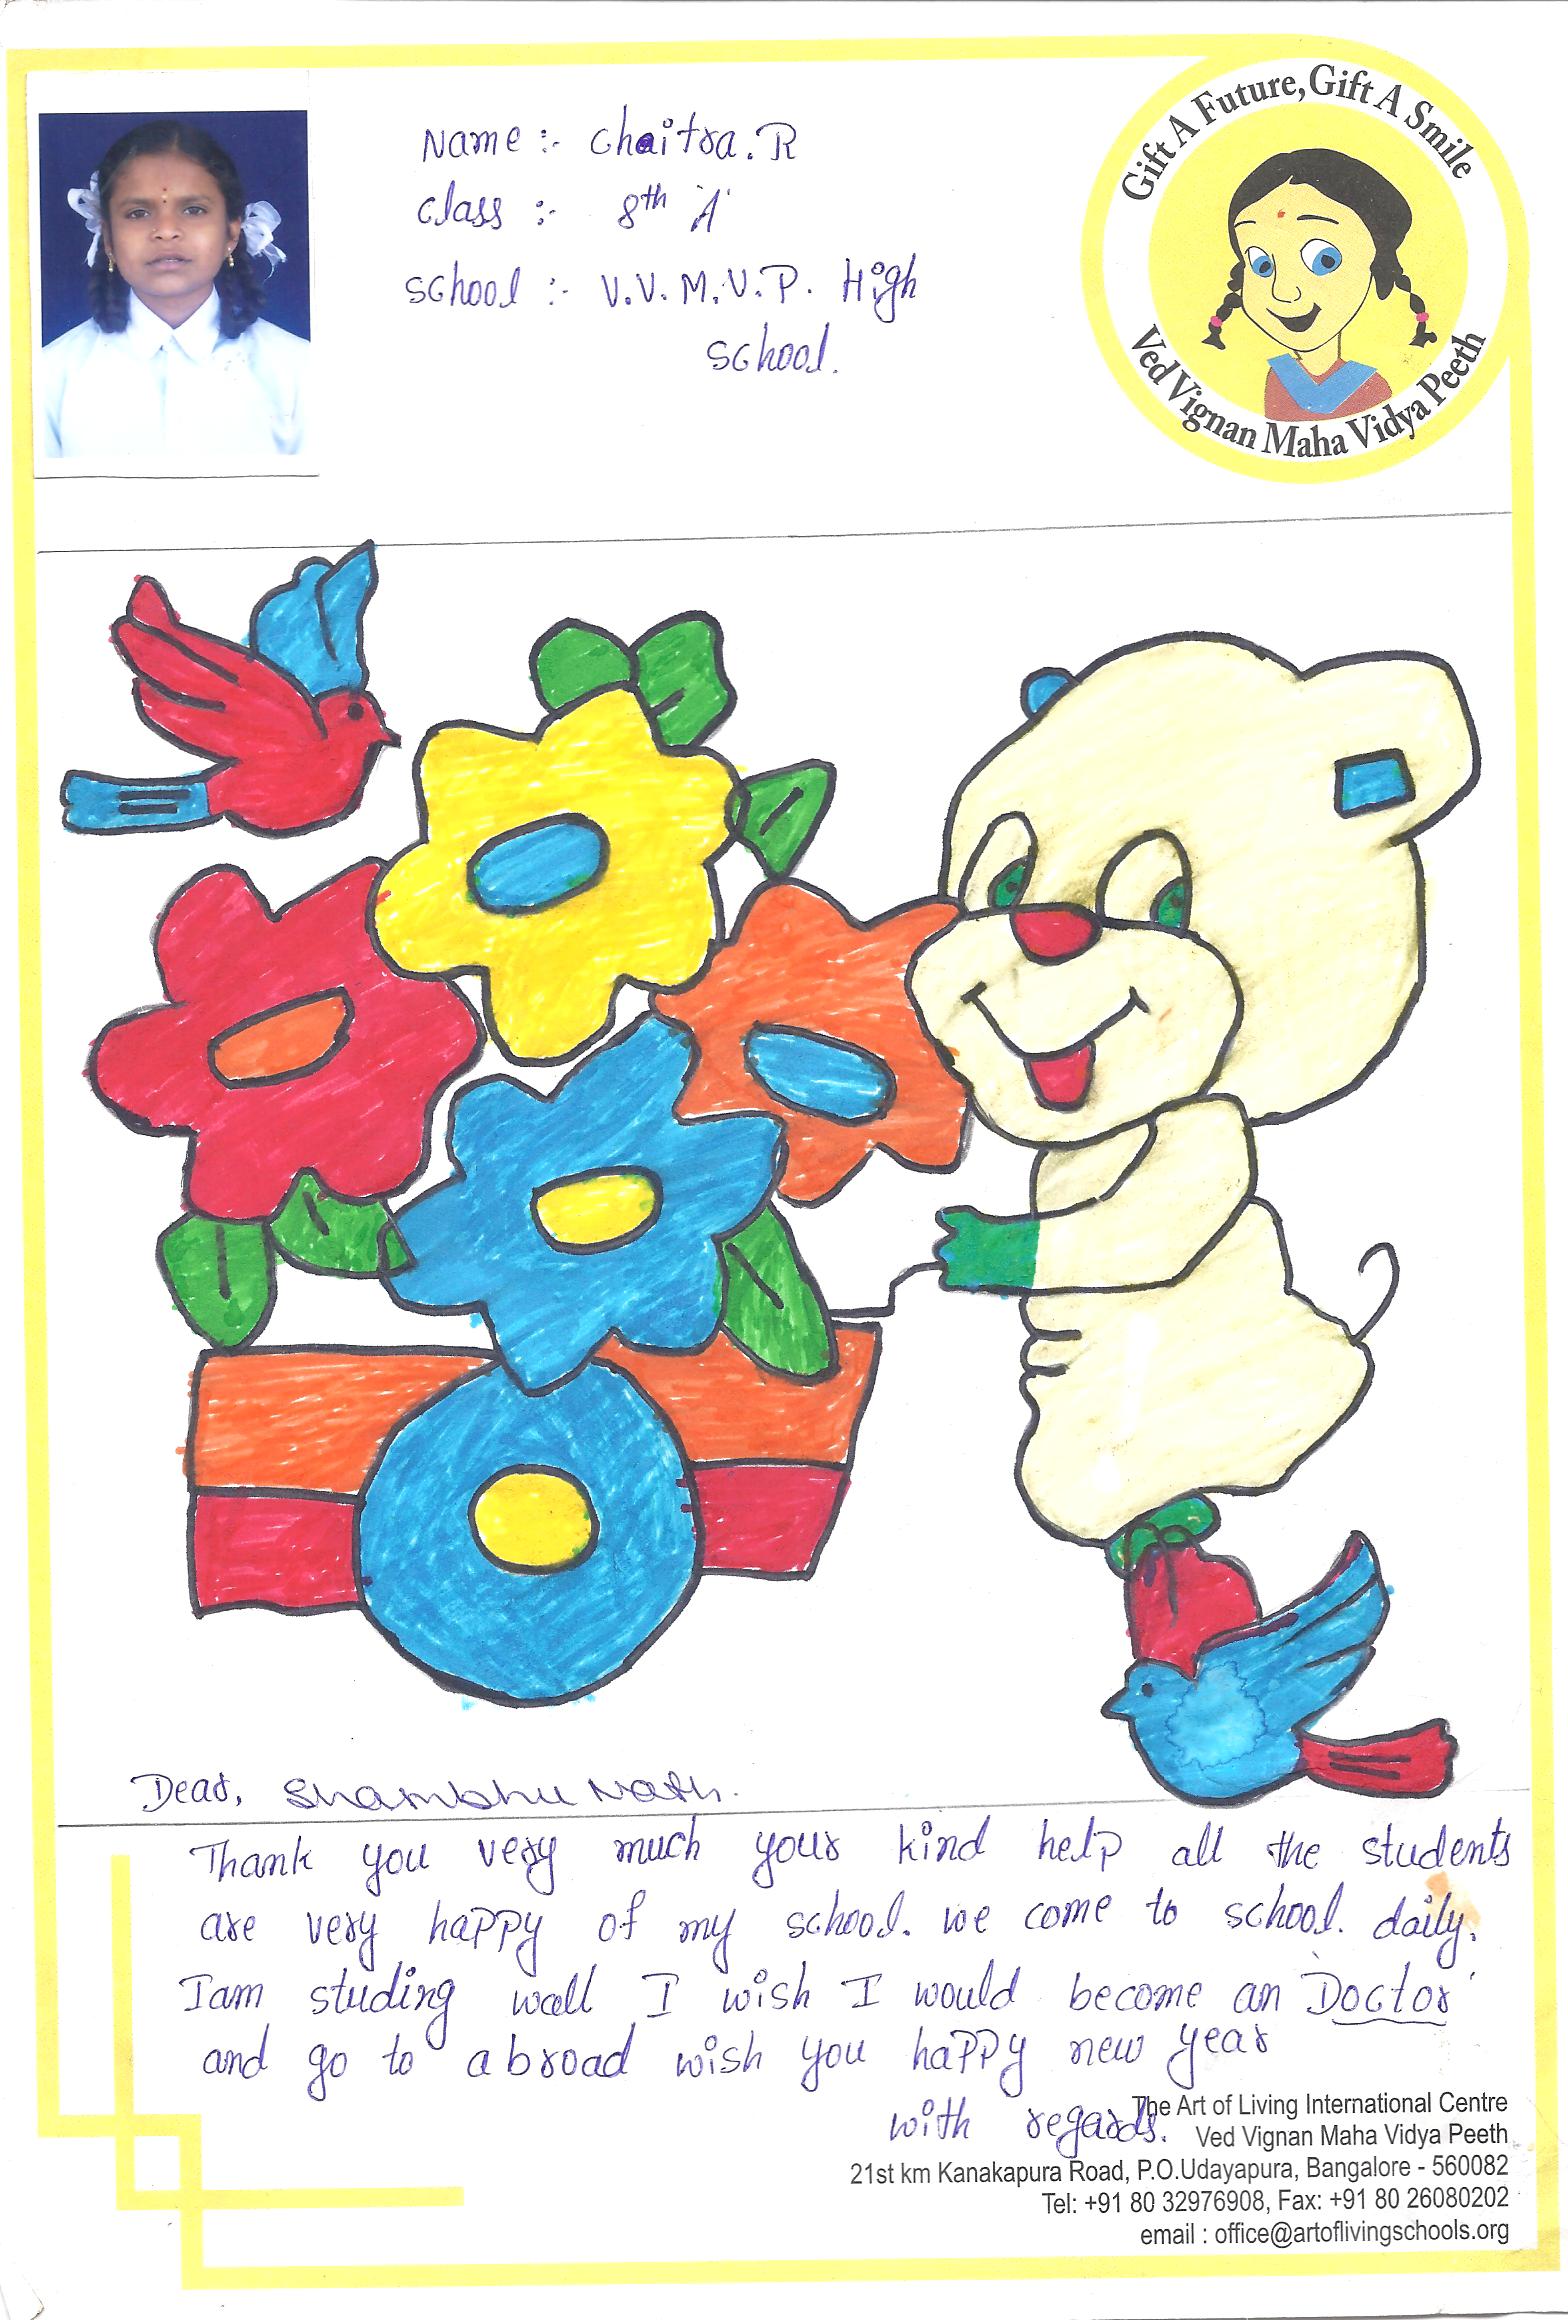 Teddy Bear painting by Chaitra